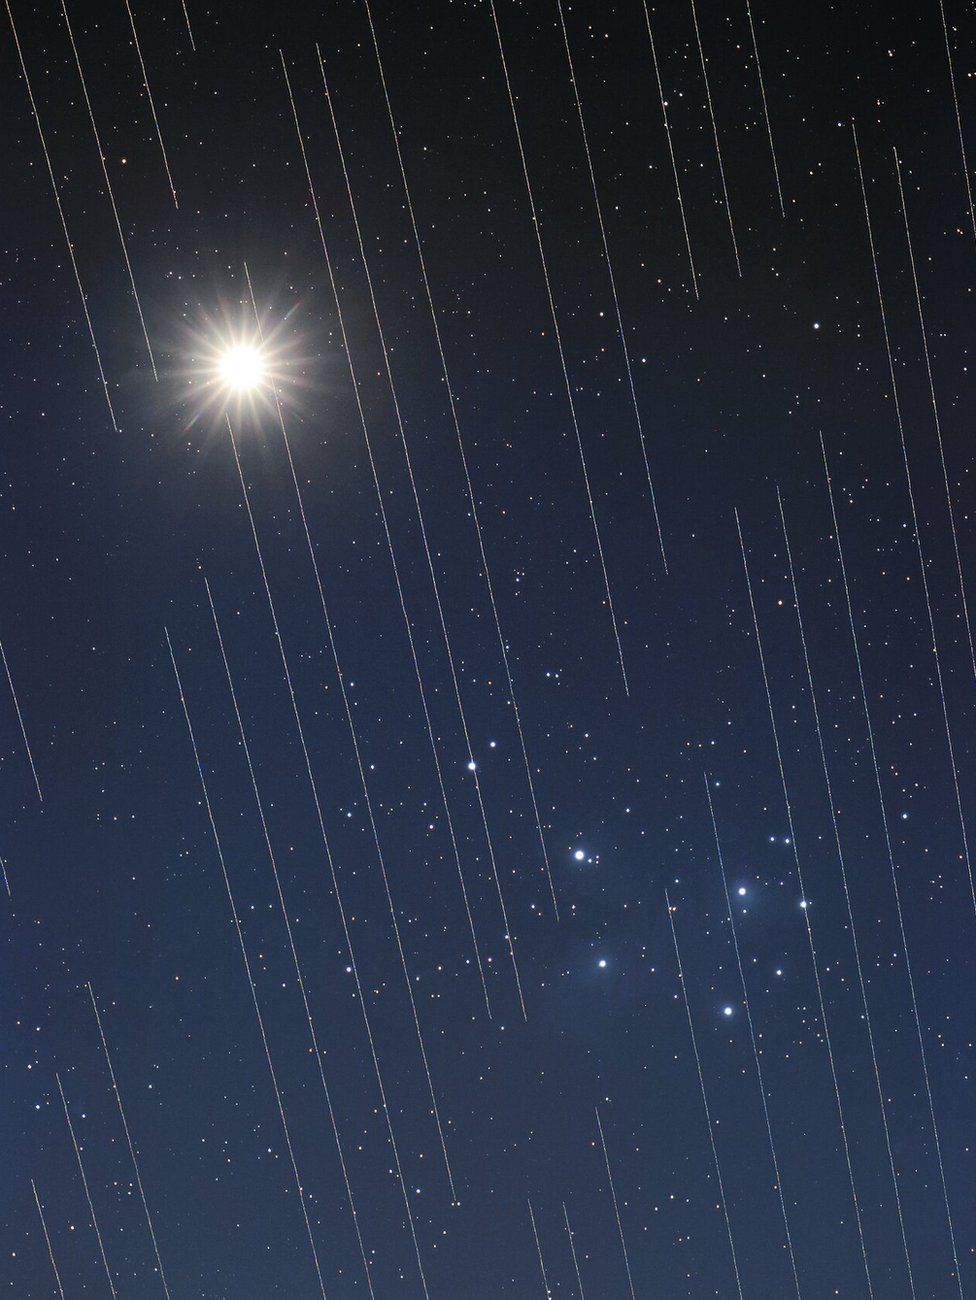 This image of Venus and the Pleiades shows the tracks of Starlink satellites